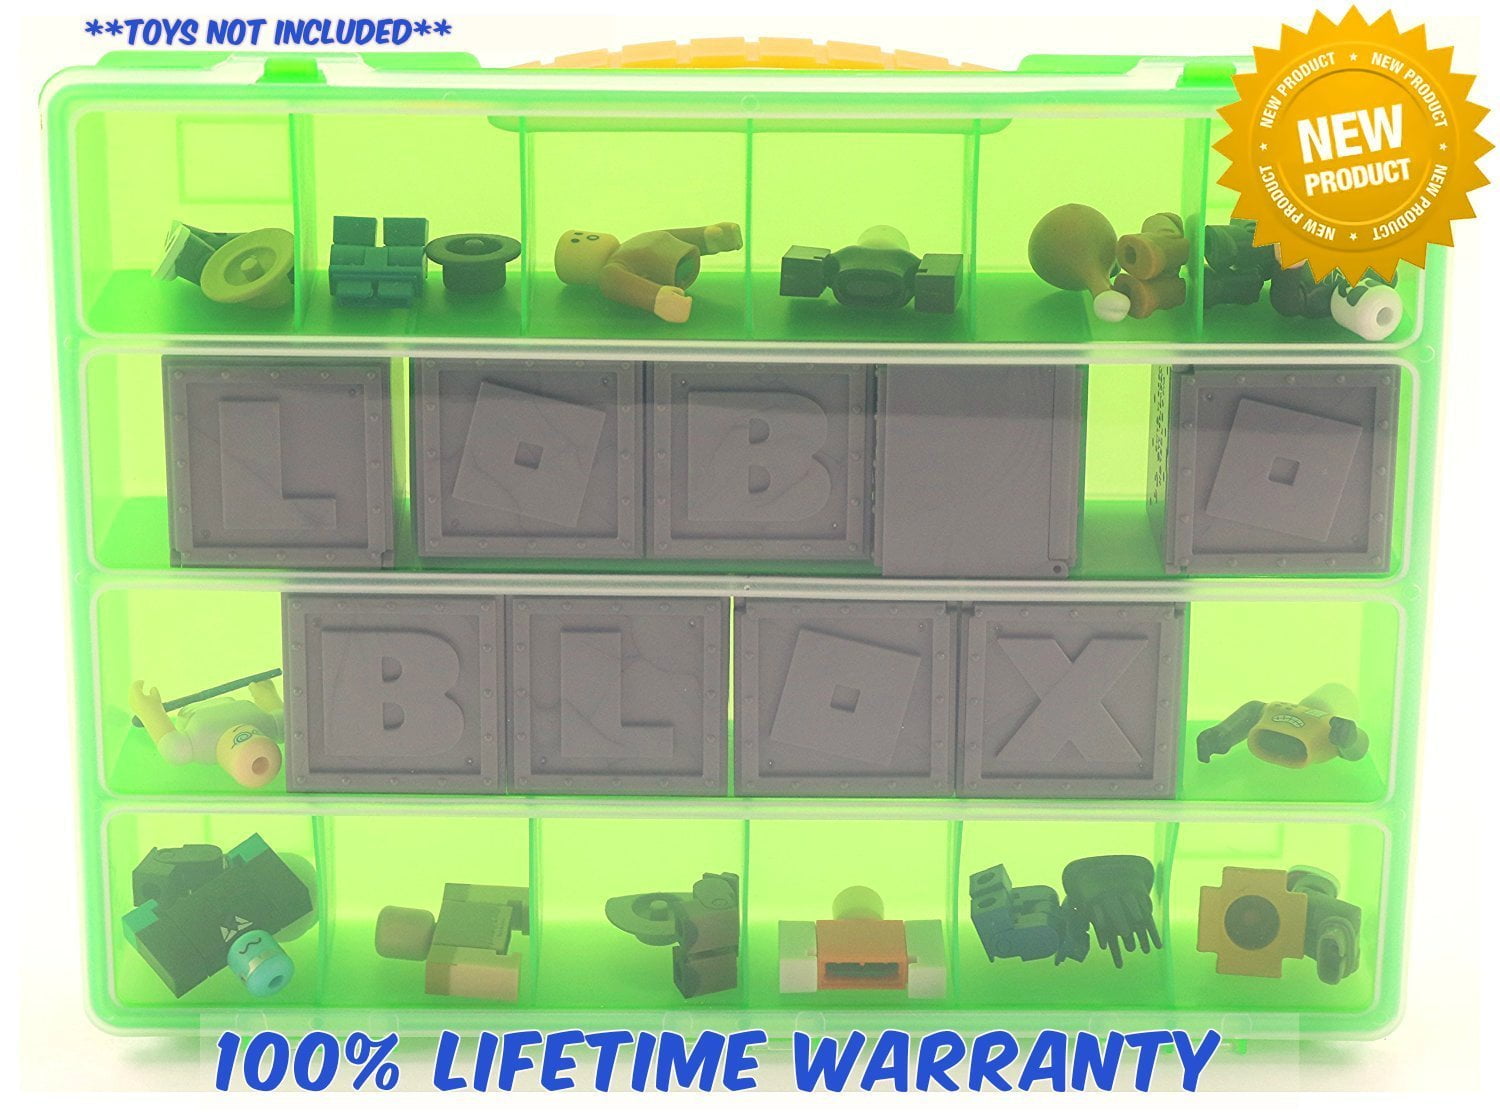 Roblox Carrying Case Stores Dozens Of Figures Durable Toy Storage Organizers By Life Made Better Green Walmart Com Walmart Com - roblox like shelf